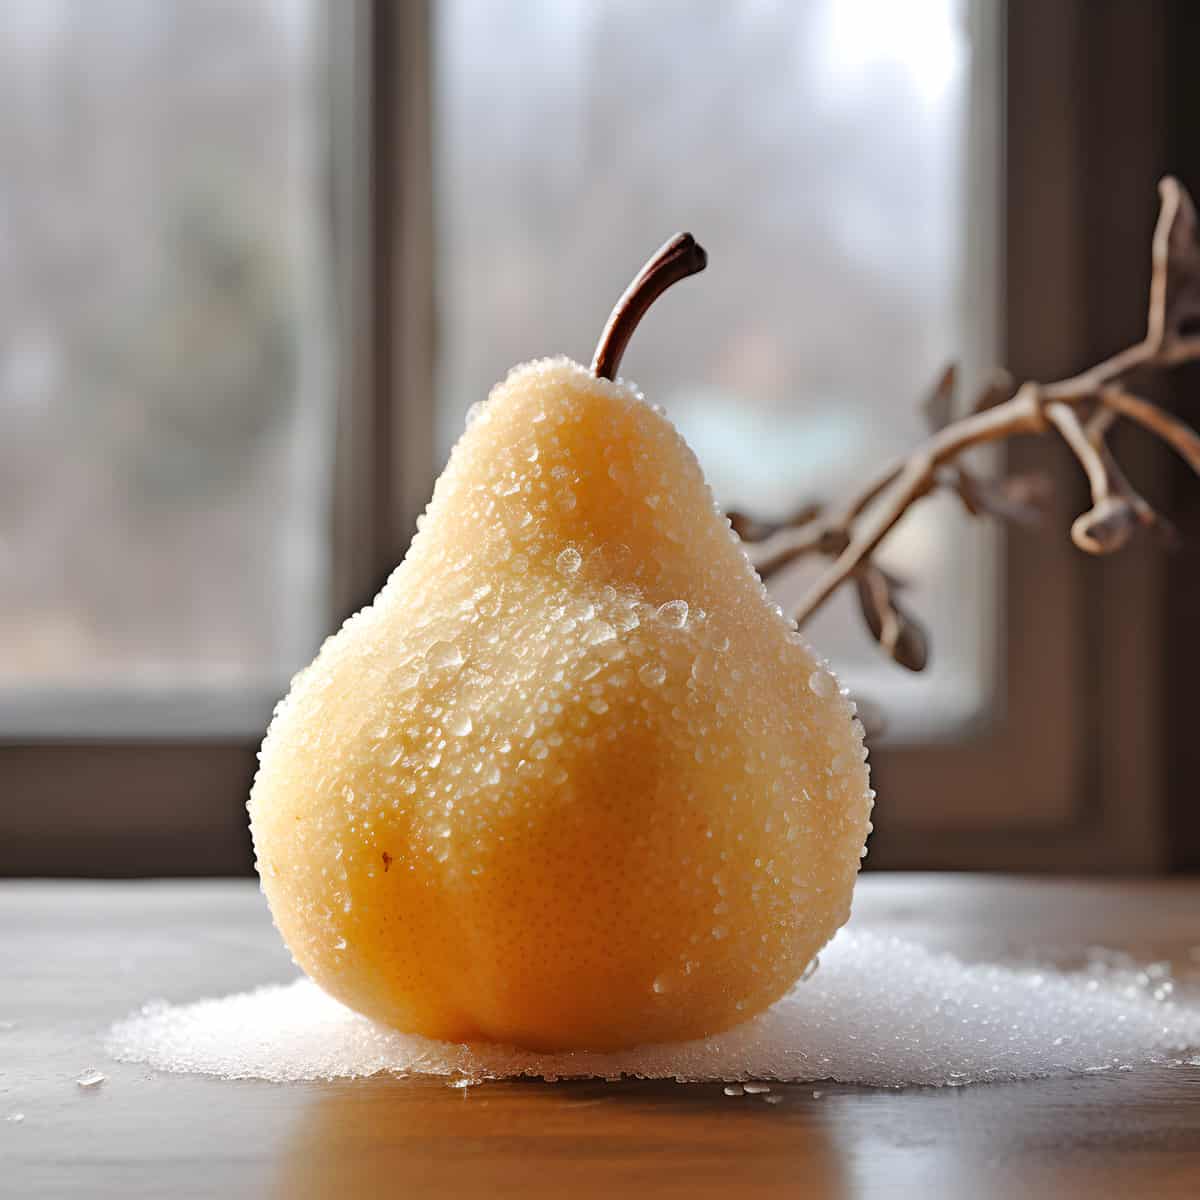 Snow Pear on a kitchen counter